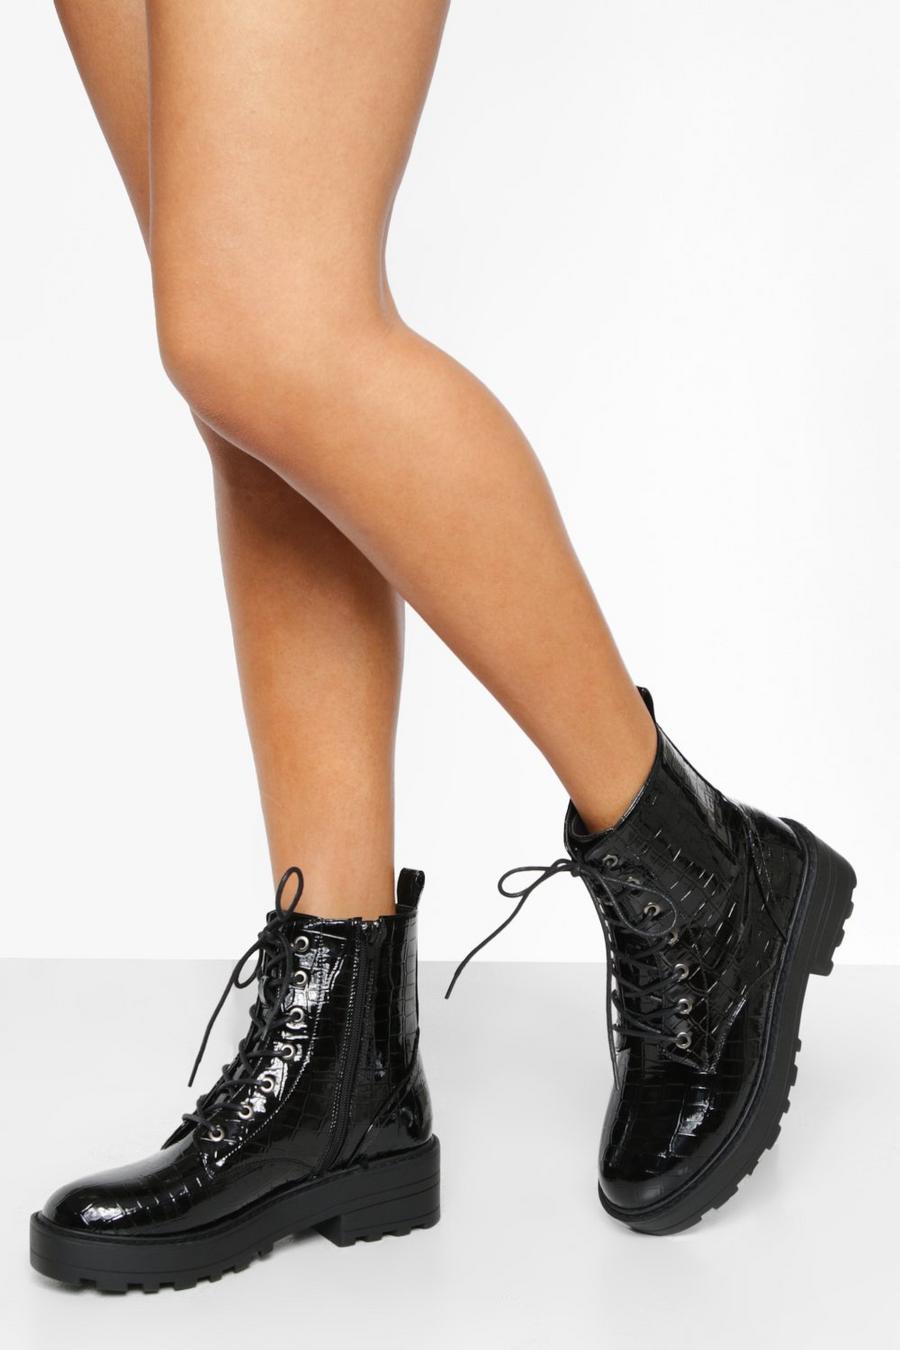 Black Patent Croc Chunky Lace Up Hiker Boots